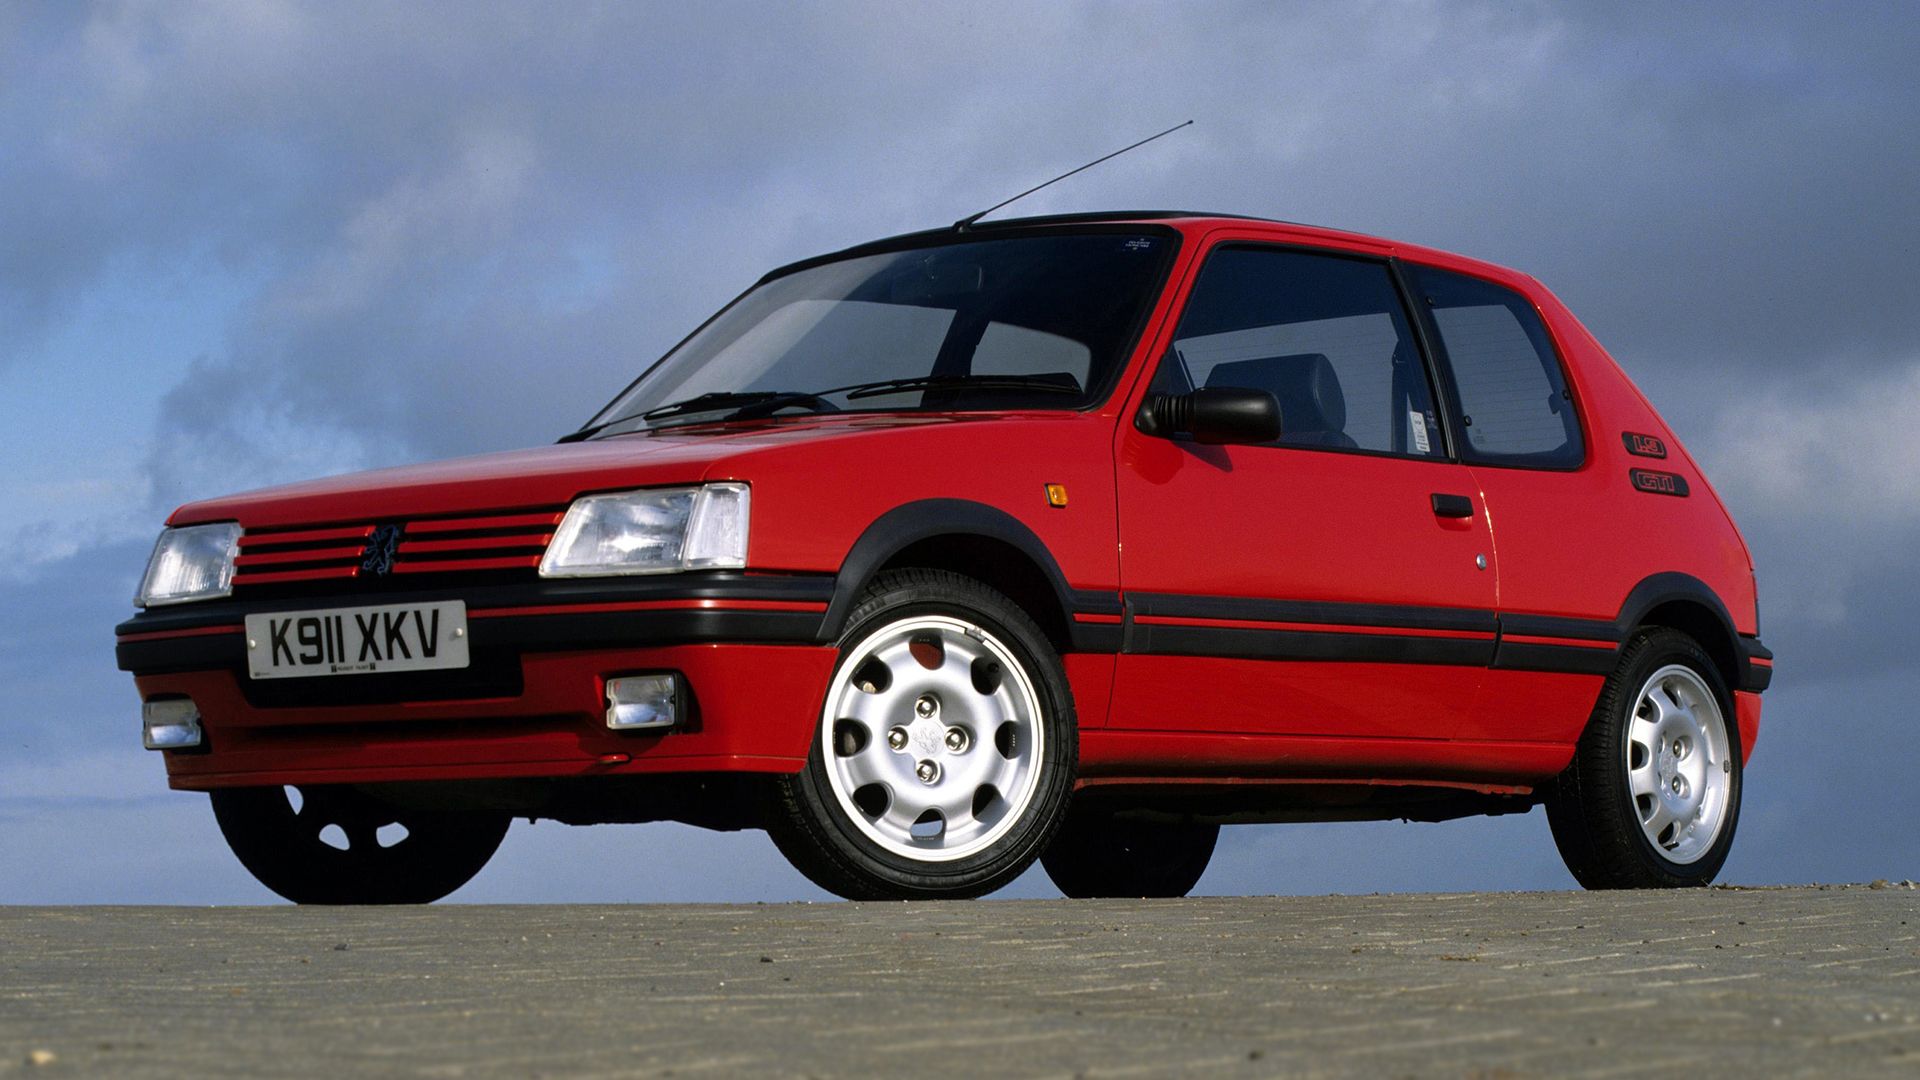 Front 3/4 view of a red 205 GTI